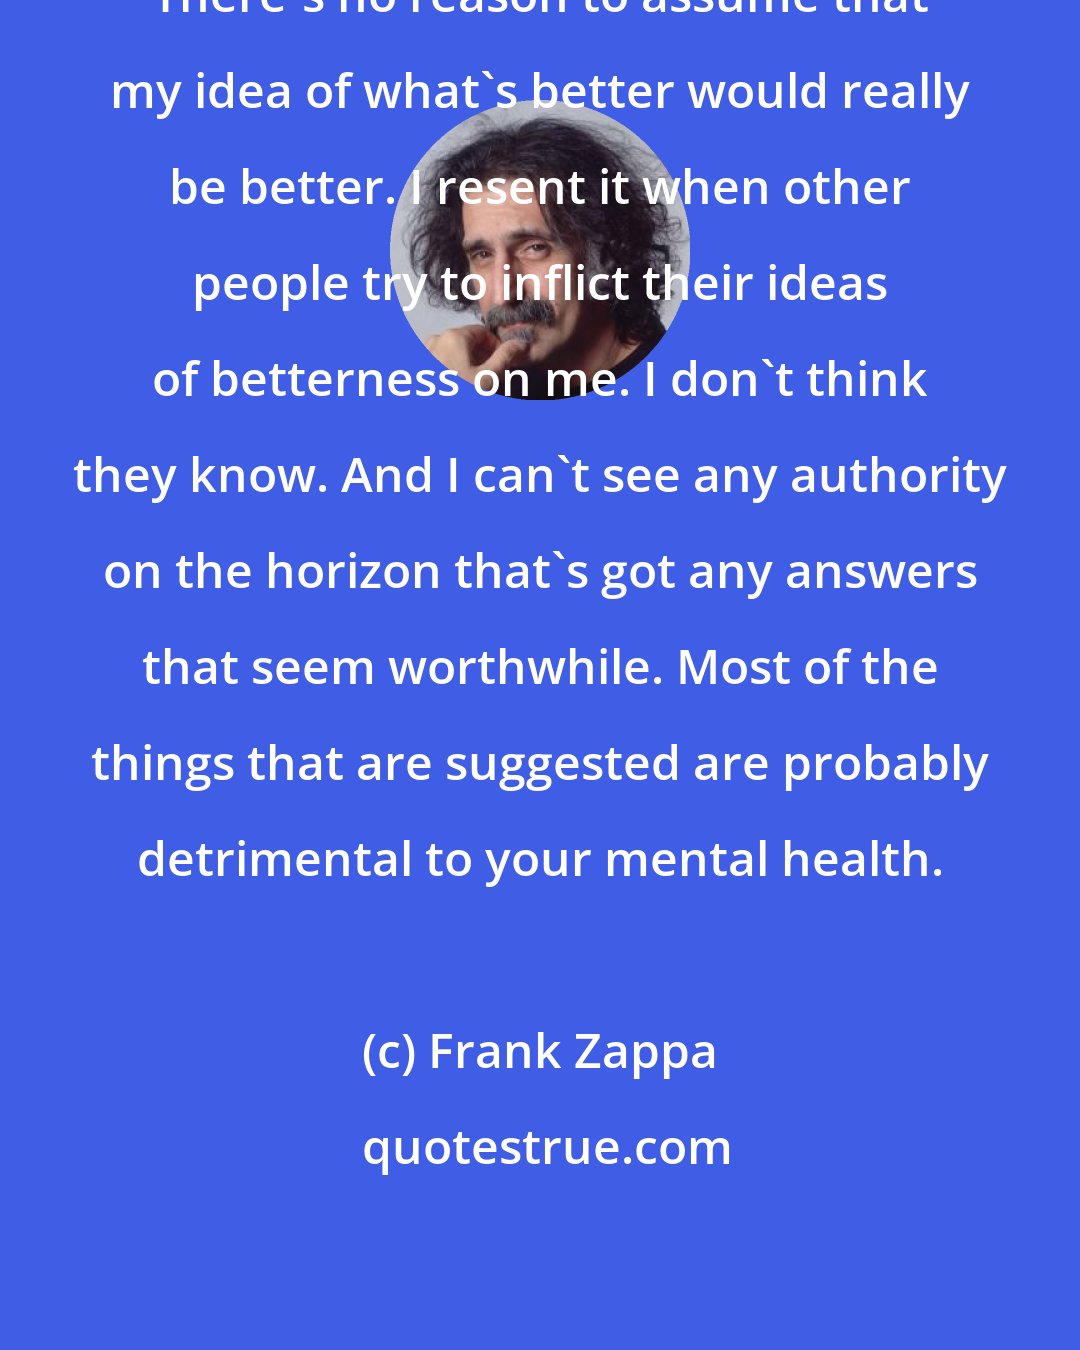 Frank Zappa: There's no reason to assume that my idea of what's better would really be better. I resent it when other people try to inflict their ideas of betterness on me. I don't think they know. And I can't see any authority on the horizon that's got any answers that seem worthwhile. Most of the things that are suggested are probably detrimental to your mental health.